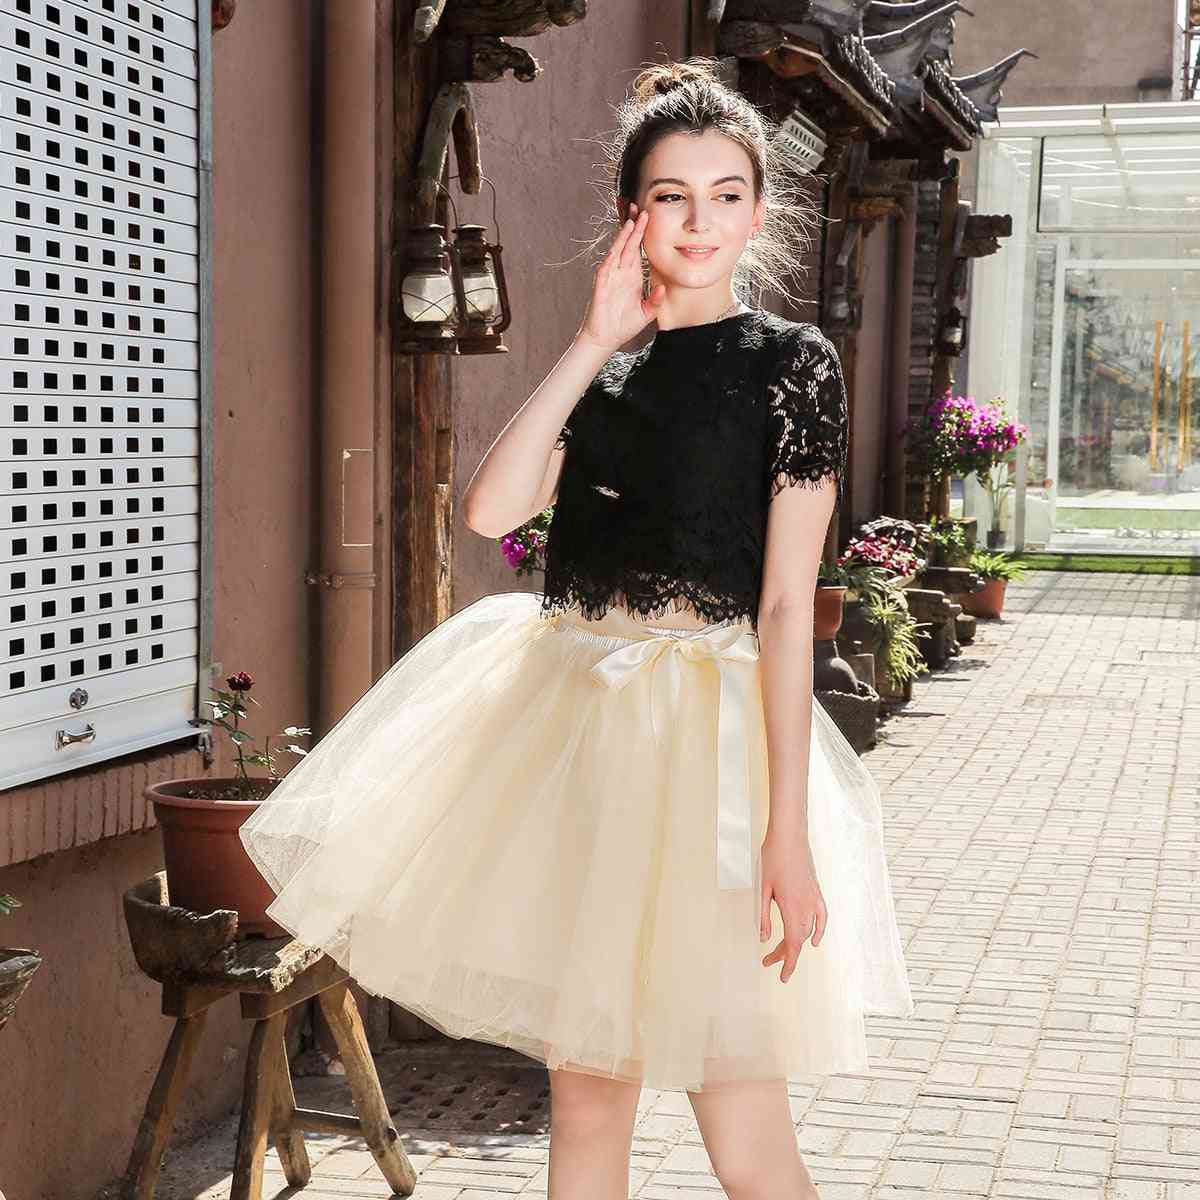 Womens 7-layers Midi Tulle Skirt, Ball Gown Petticoat